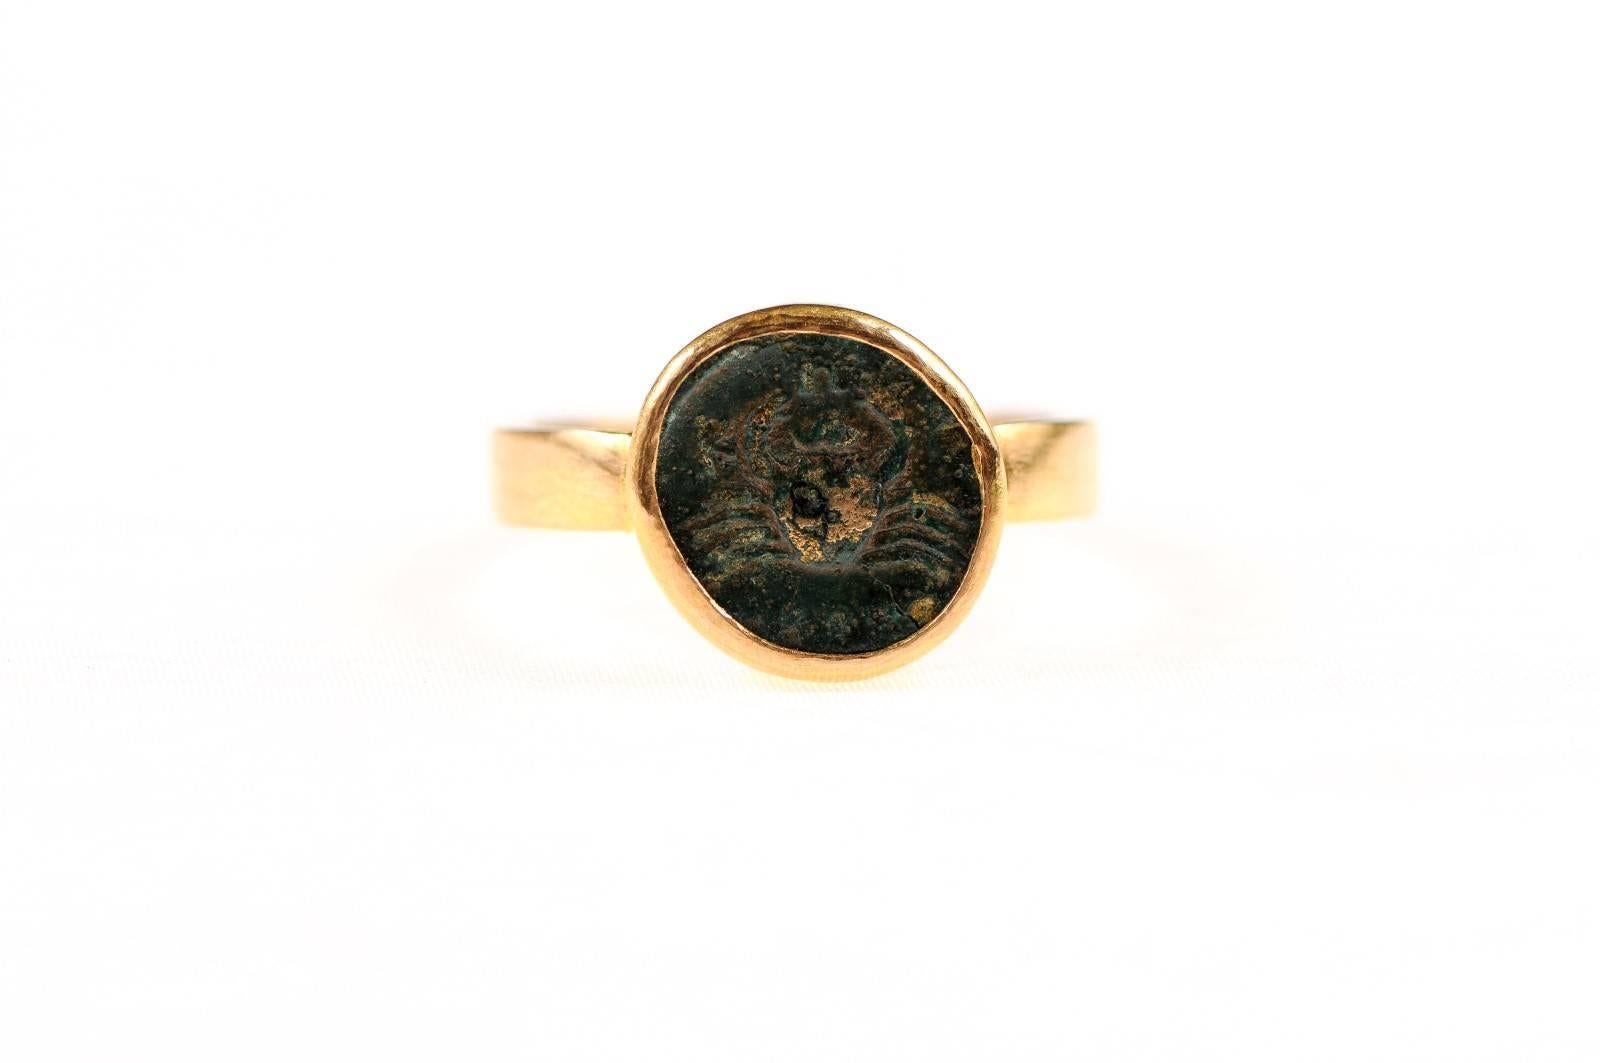 Ancient Bruttium Coin with Crab Design Set in 22-Karat Gold Ring In Good Condition For Sale In Atlanta, GA